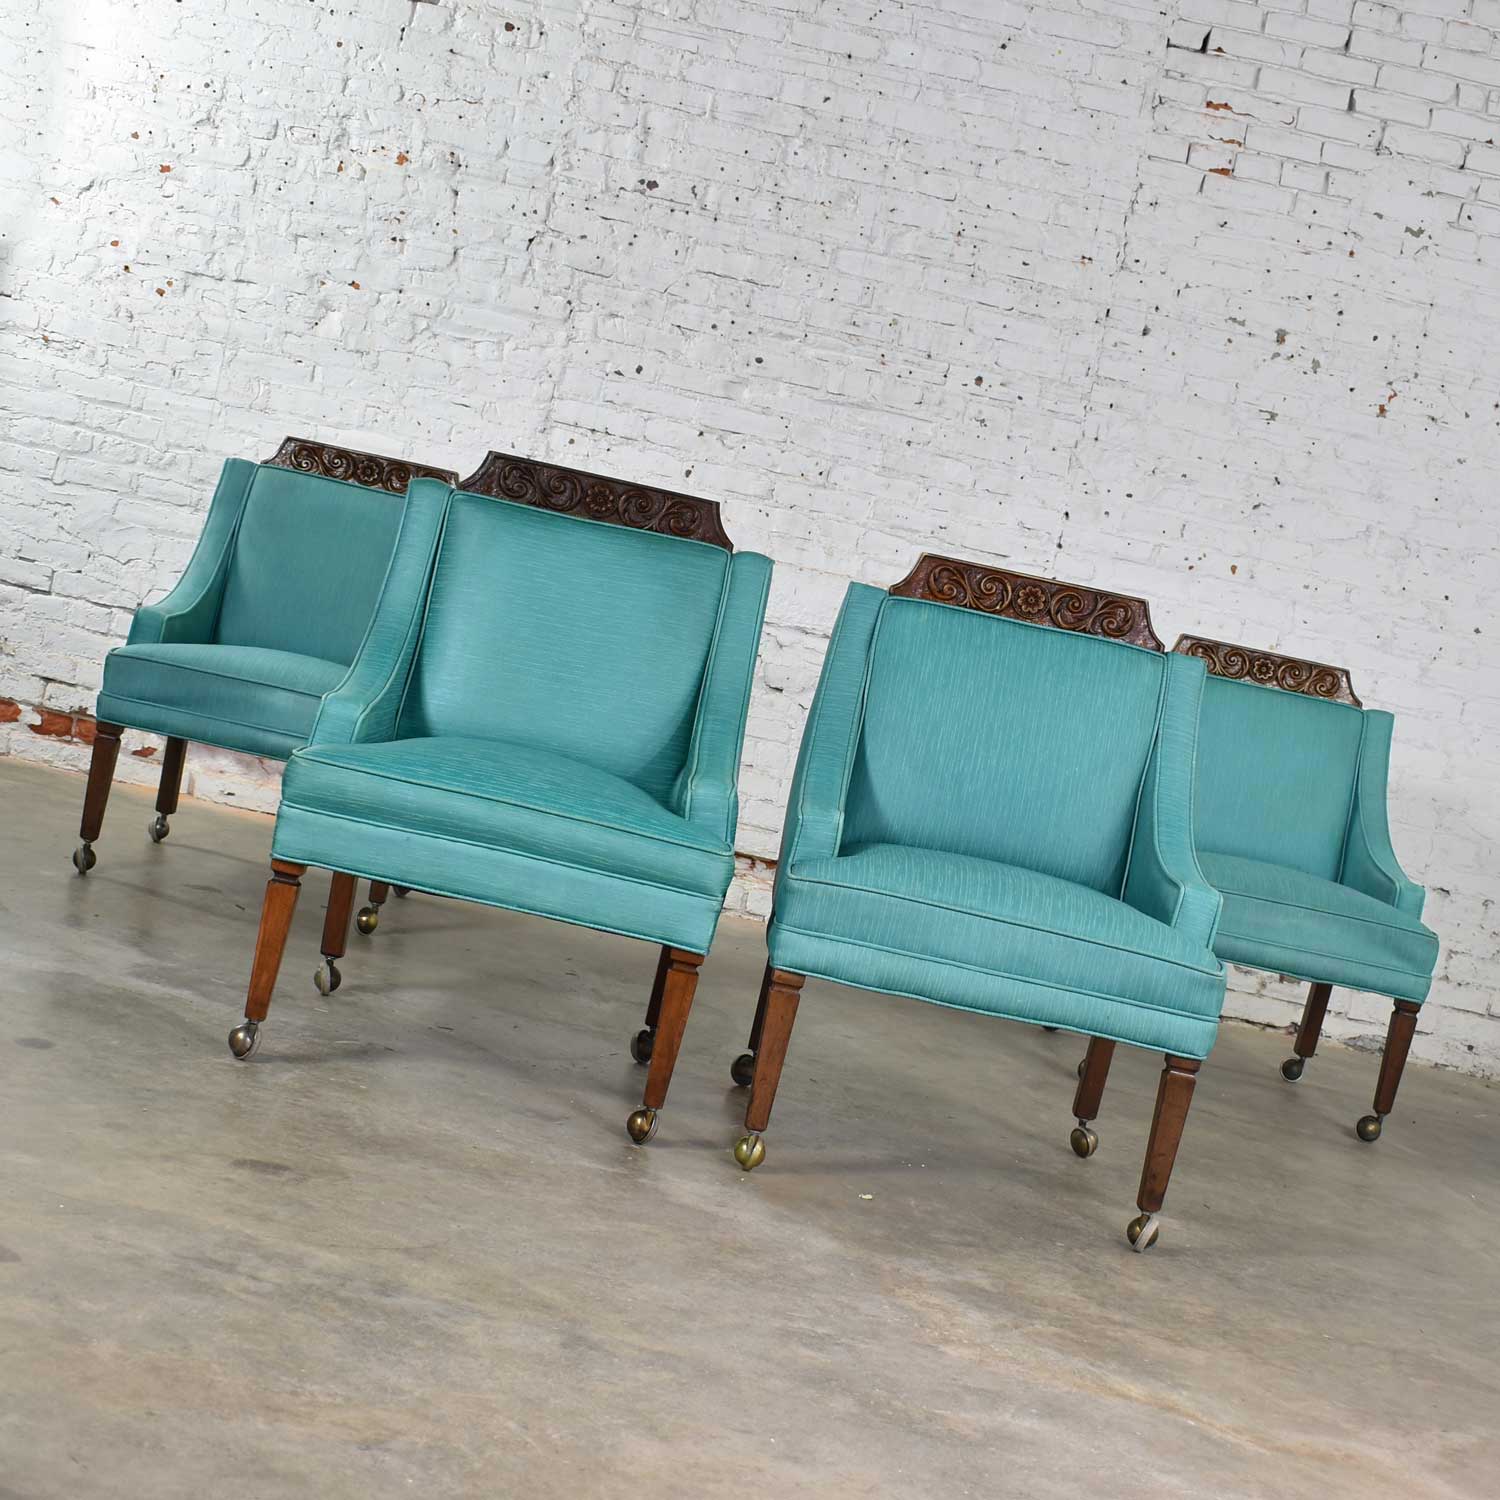 Set of 4 Spanish Style Rolling Game Chairs with Turquoise Vinyl Original Upholstery